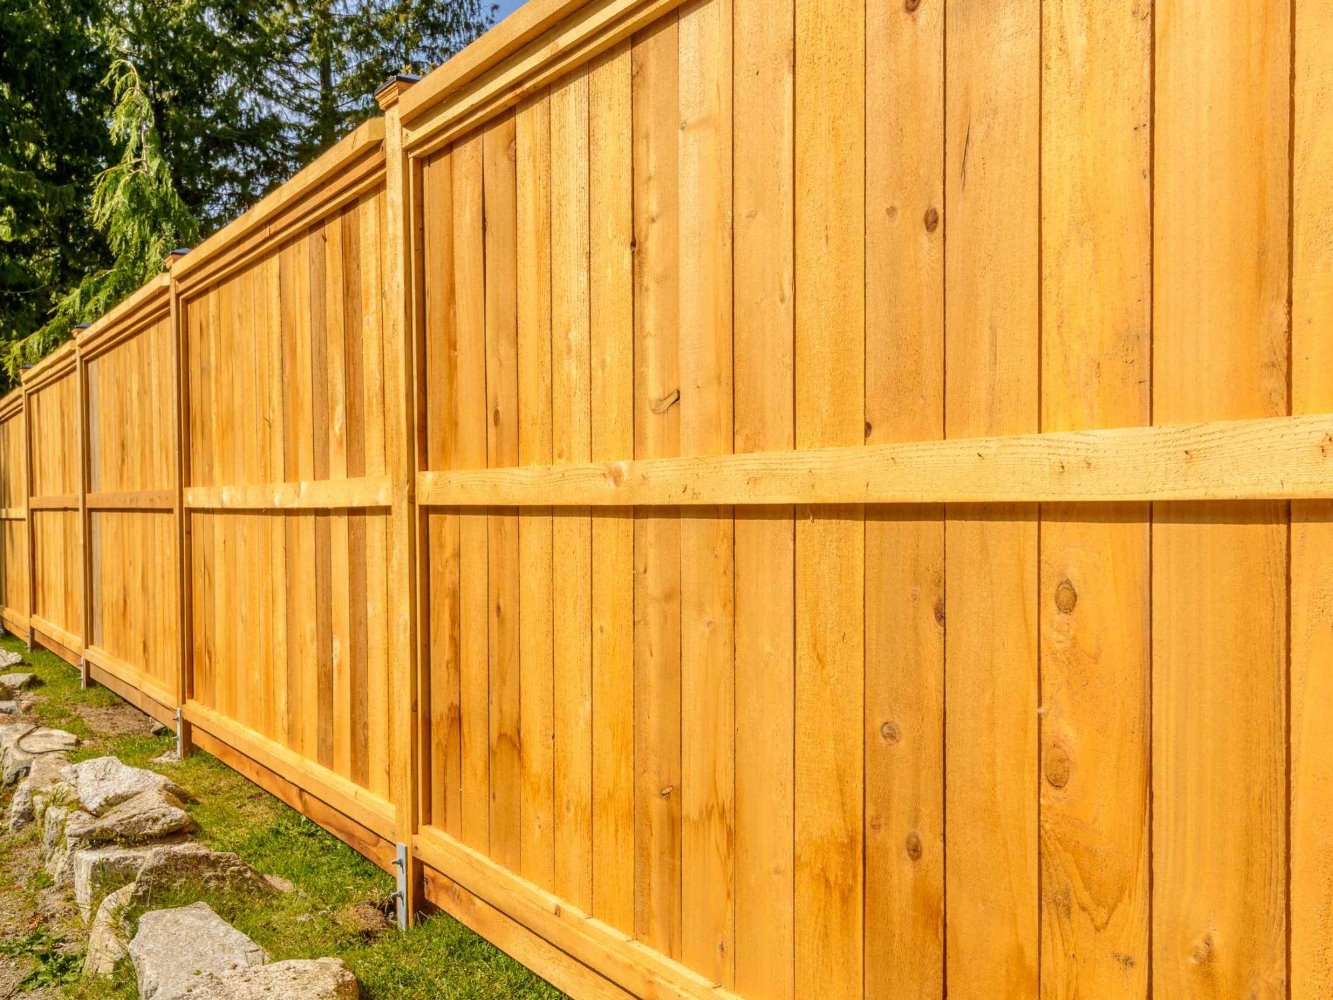 Republic MO cap and trim style wood fence